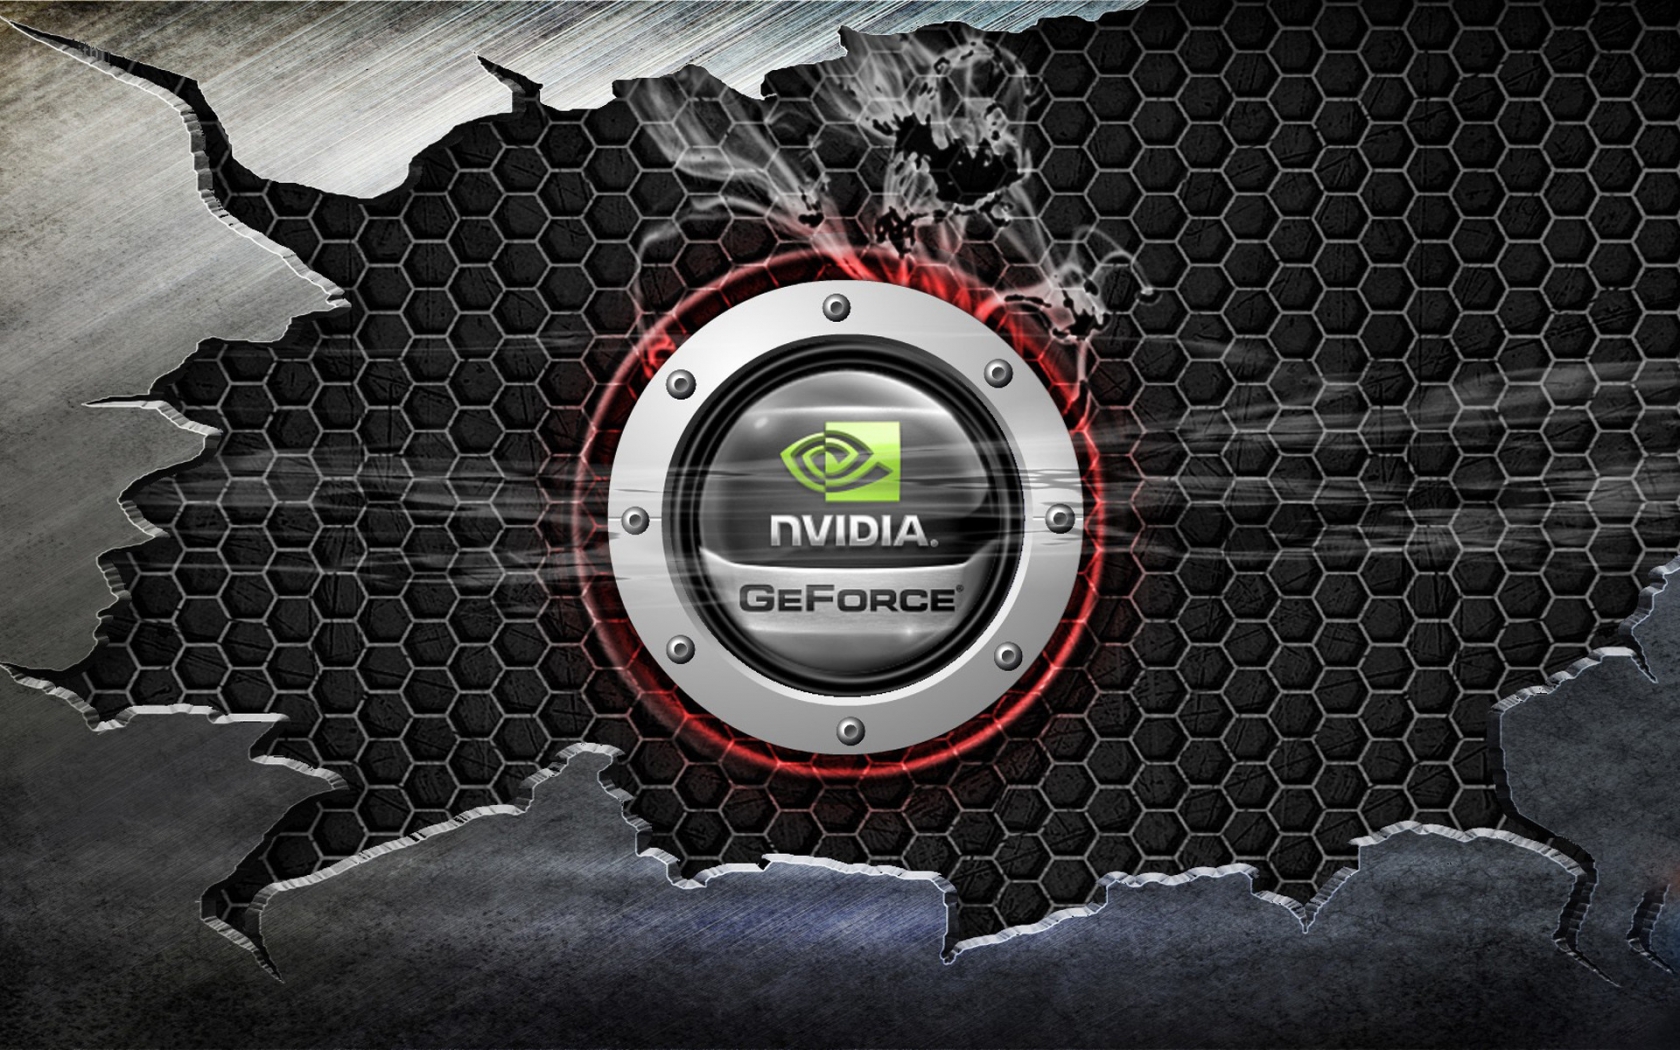 nVIDIA for 1680 x 1050 widescreen resolution